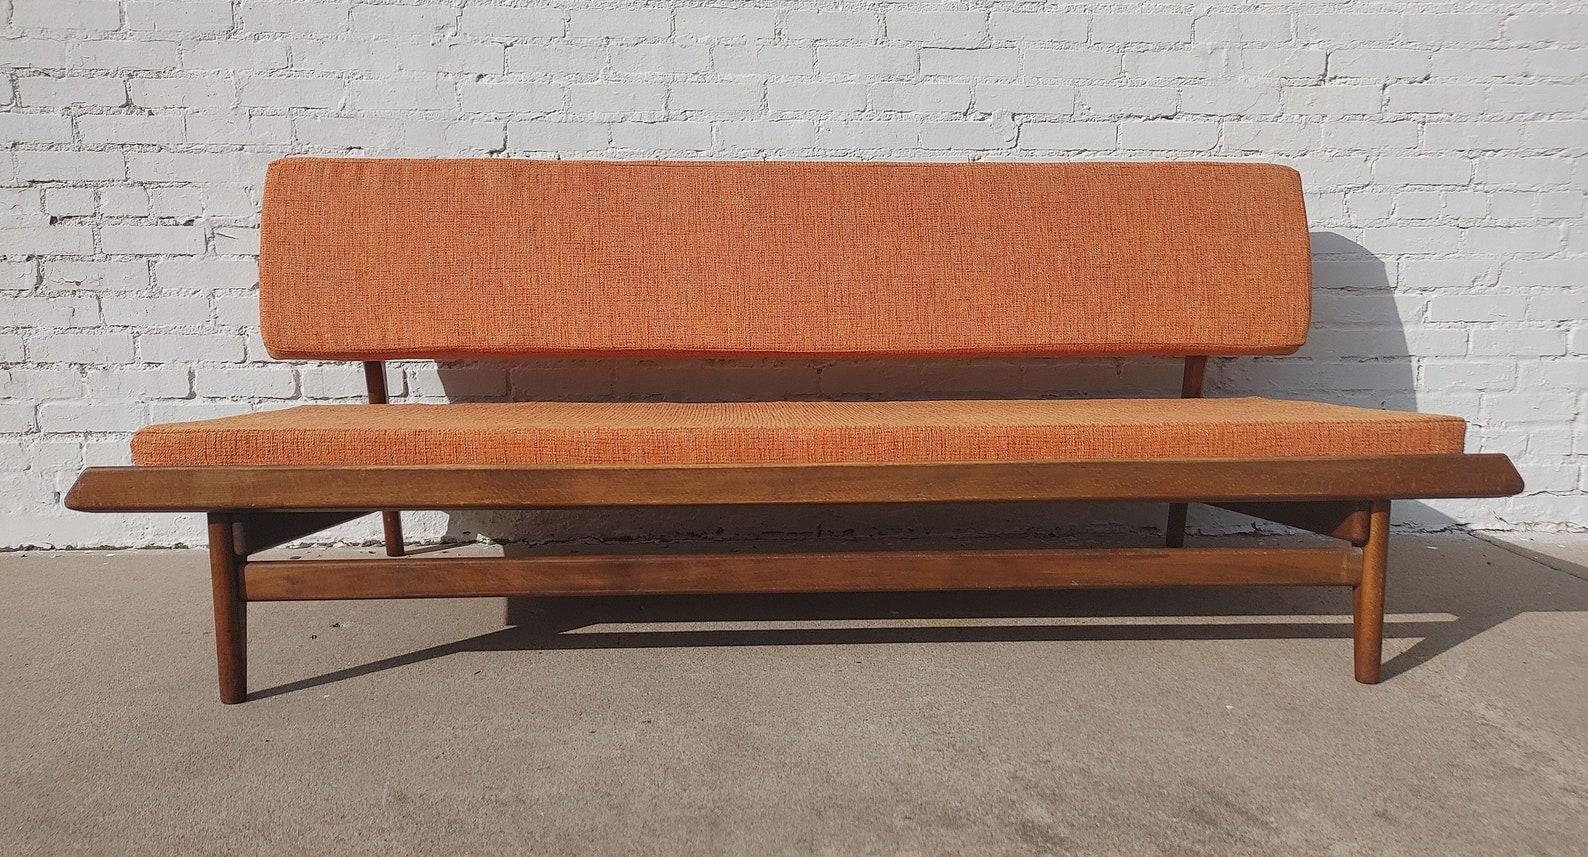 Mid Century Danish Modern Solid Walnut Daybed Sofa Attributed to Grete Jalk

Attributed to Grete Jalk. Above average vintage condition and structurally sound. Has some expected slight finish wear and scratching. Very well made. Outdoor listing